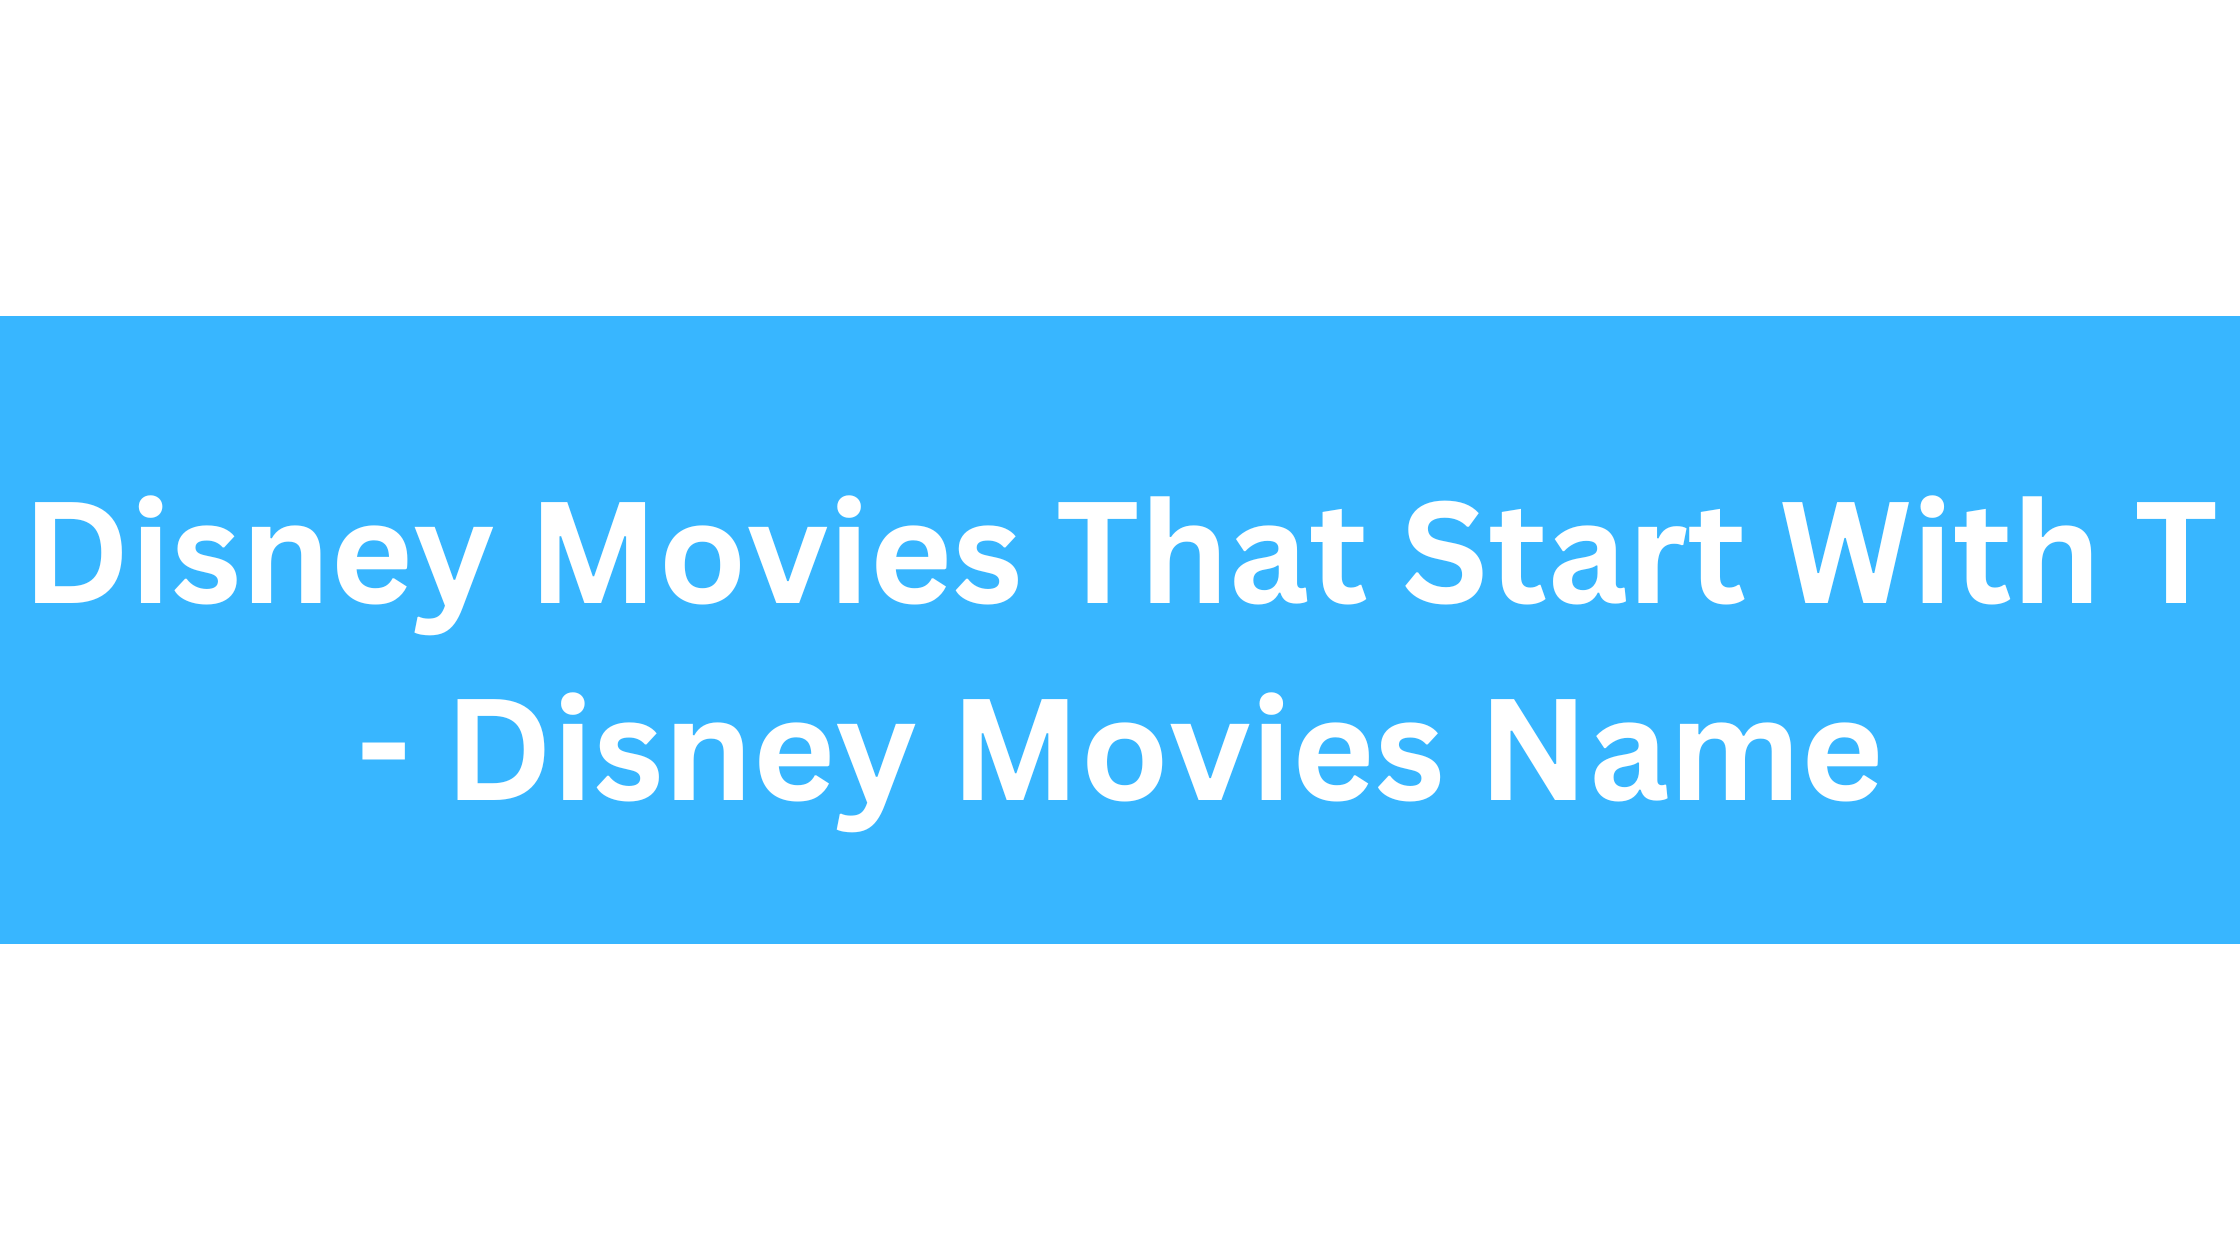 Disney Movies That Start With T